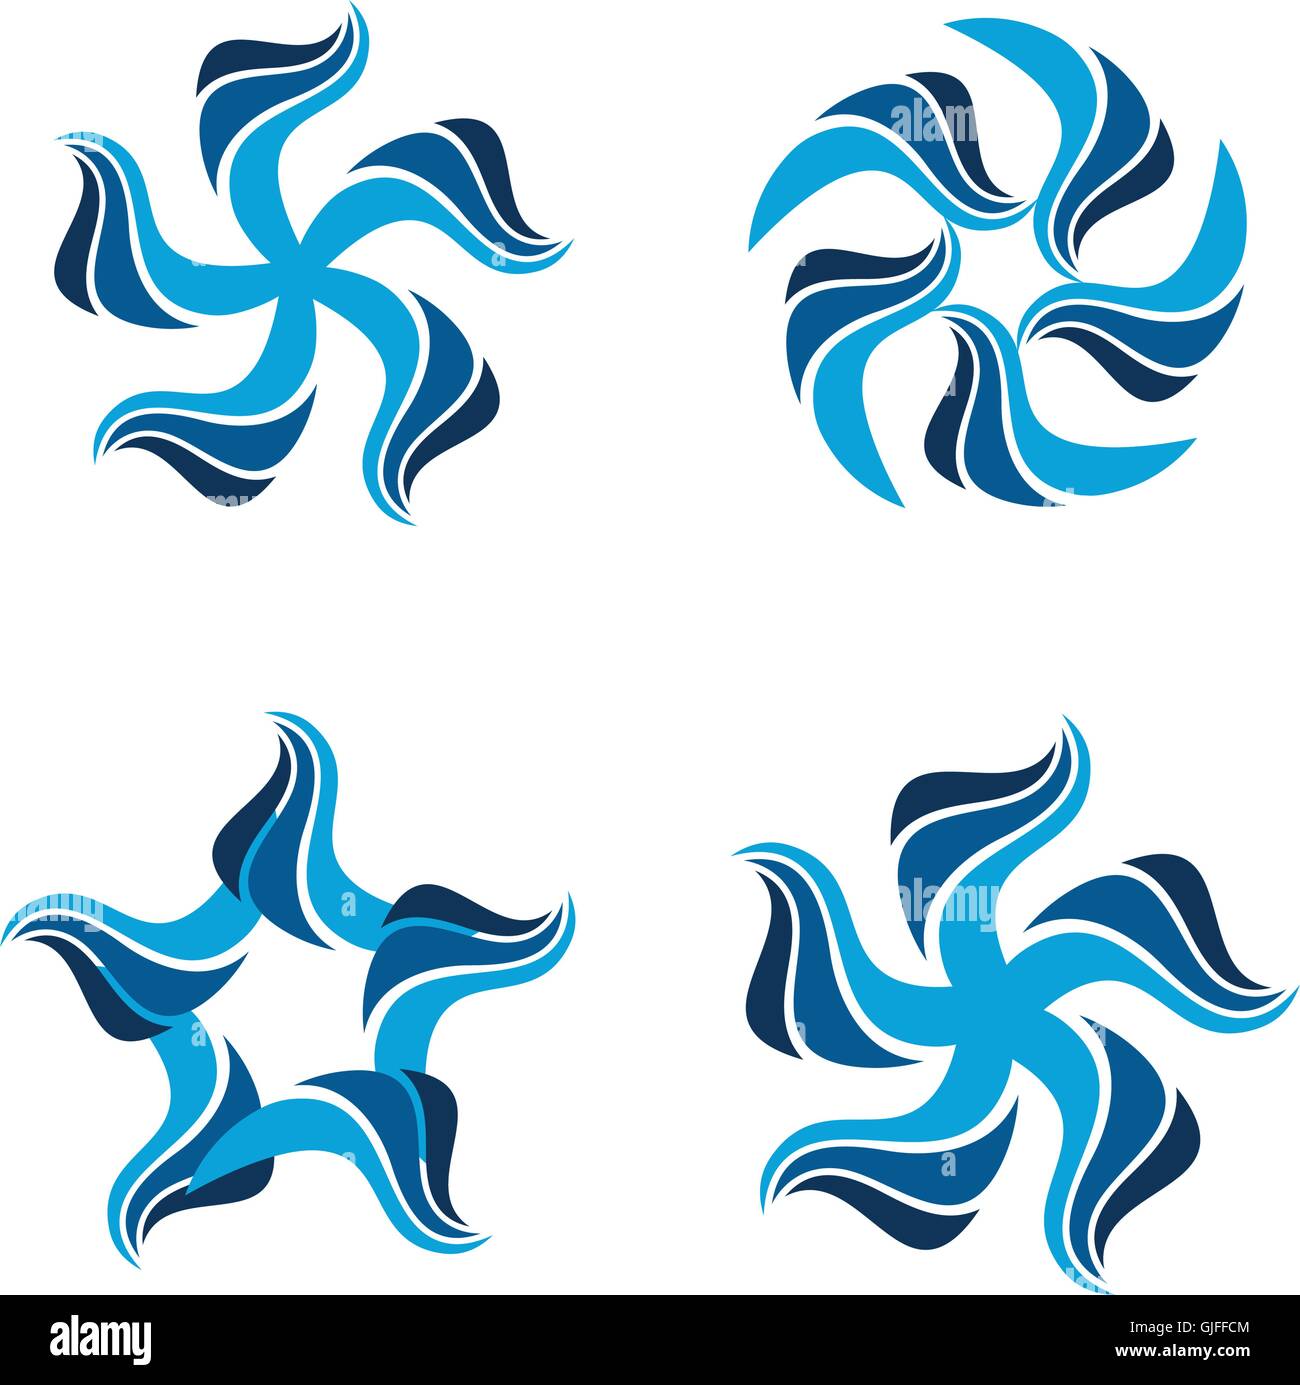 Isolated abstract flowers vector logo set. Floral elements. Water logotypes. Stock Vector